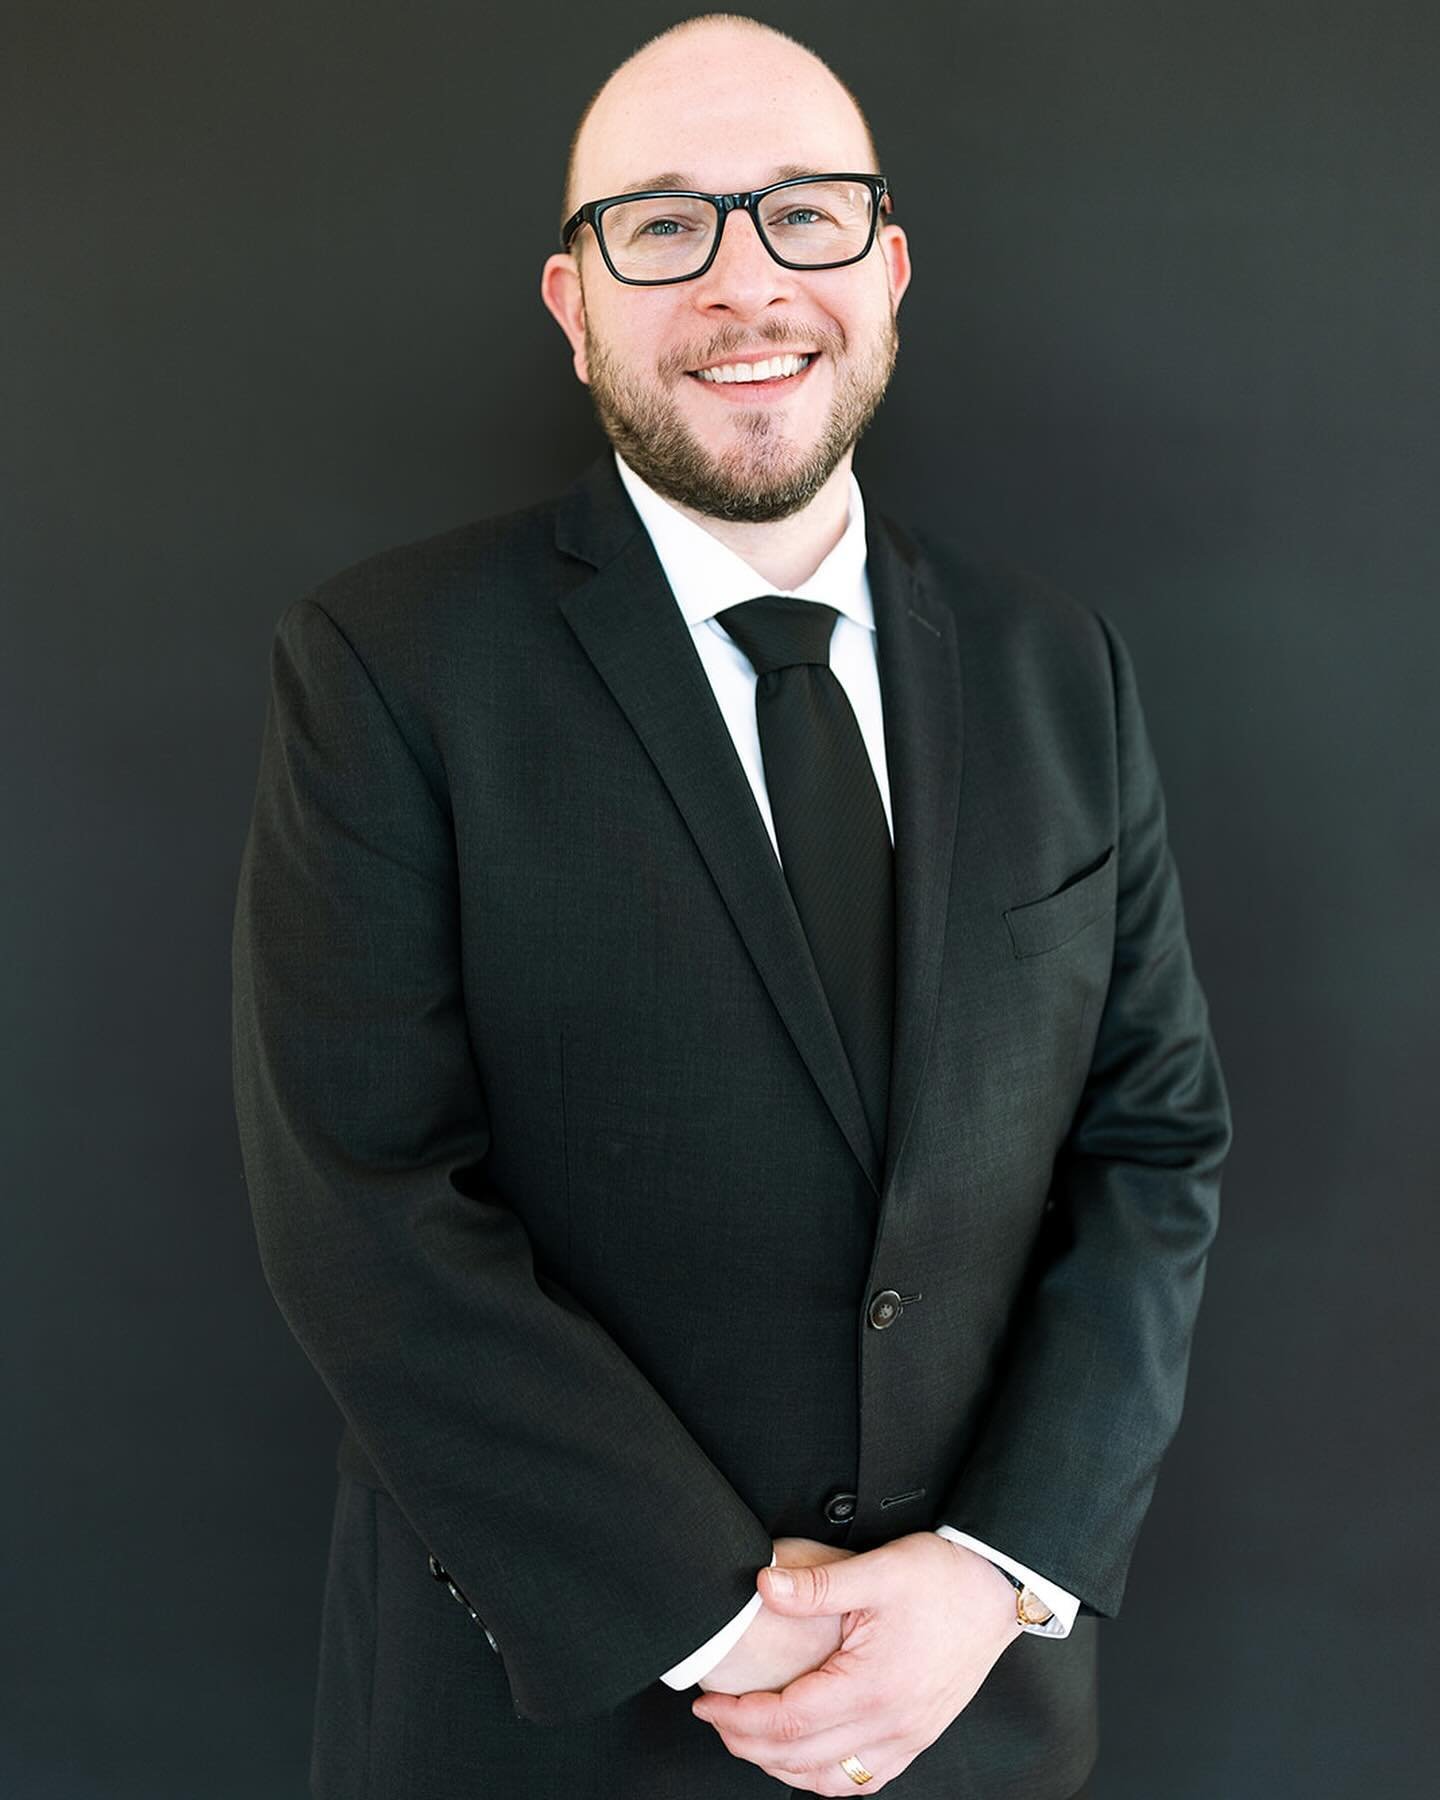 🎶 MEET THE TEAM 🎶 

Say hey to Seth, owner and creative director of ROL Weddings! 

Seth started this company in 2018 and has worked diligently to build and maintain a solid team with consistent experience, professionalism and vibes. 

He&rsquo;s b